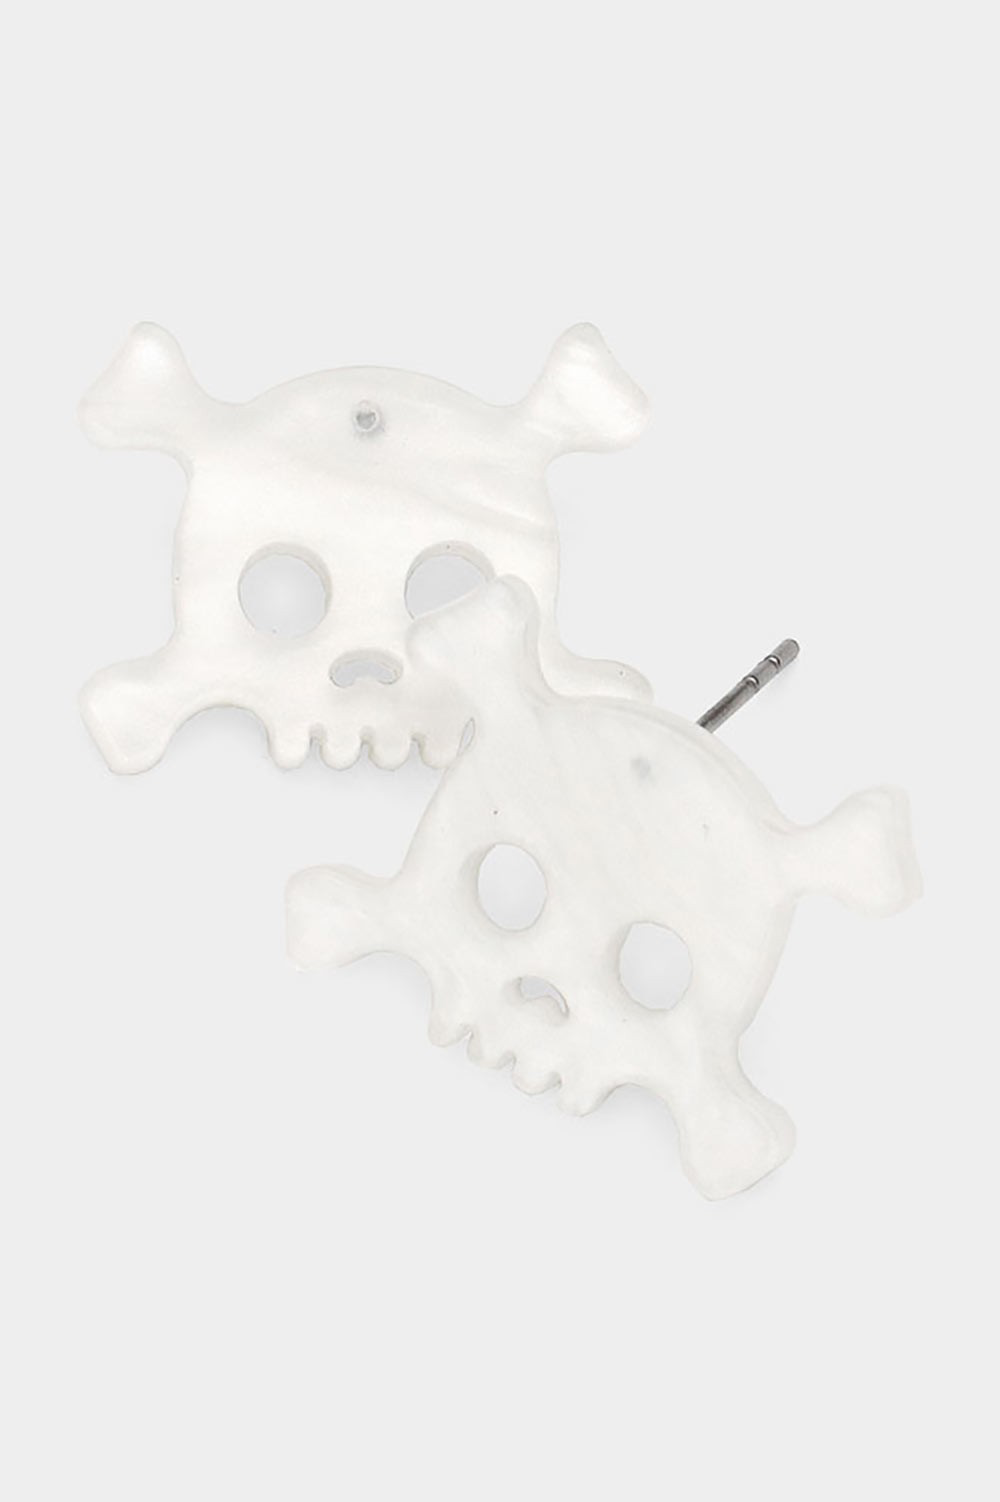 pair of stylized skull and crossbones post earrings in pearly off-white acrylic resin